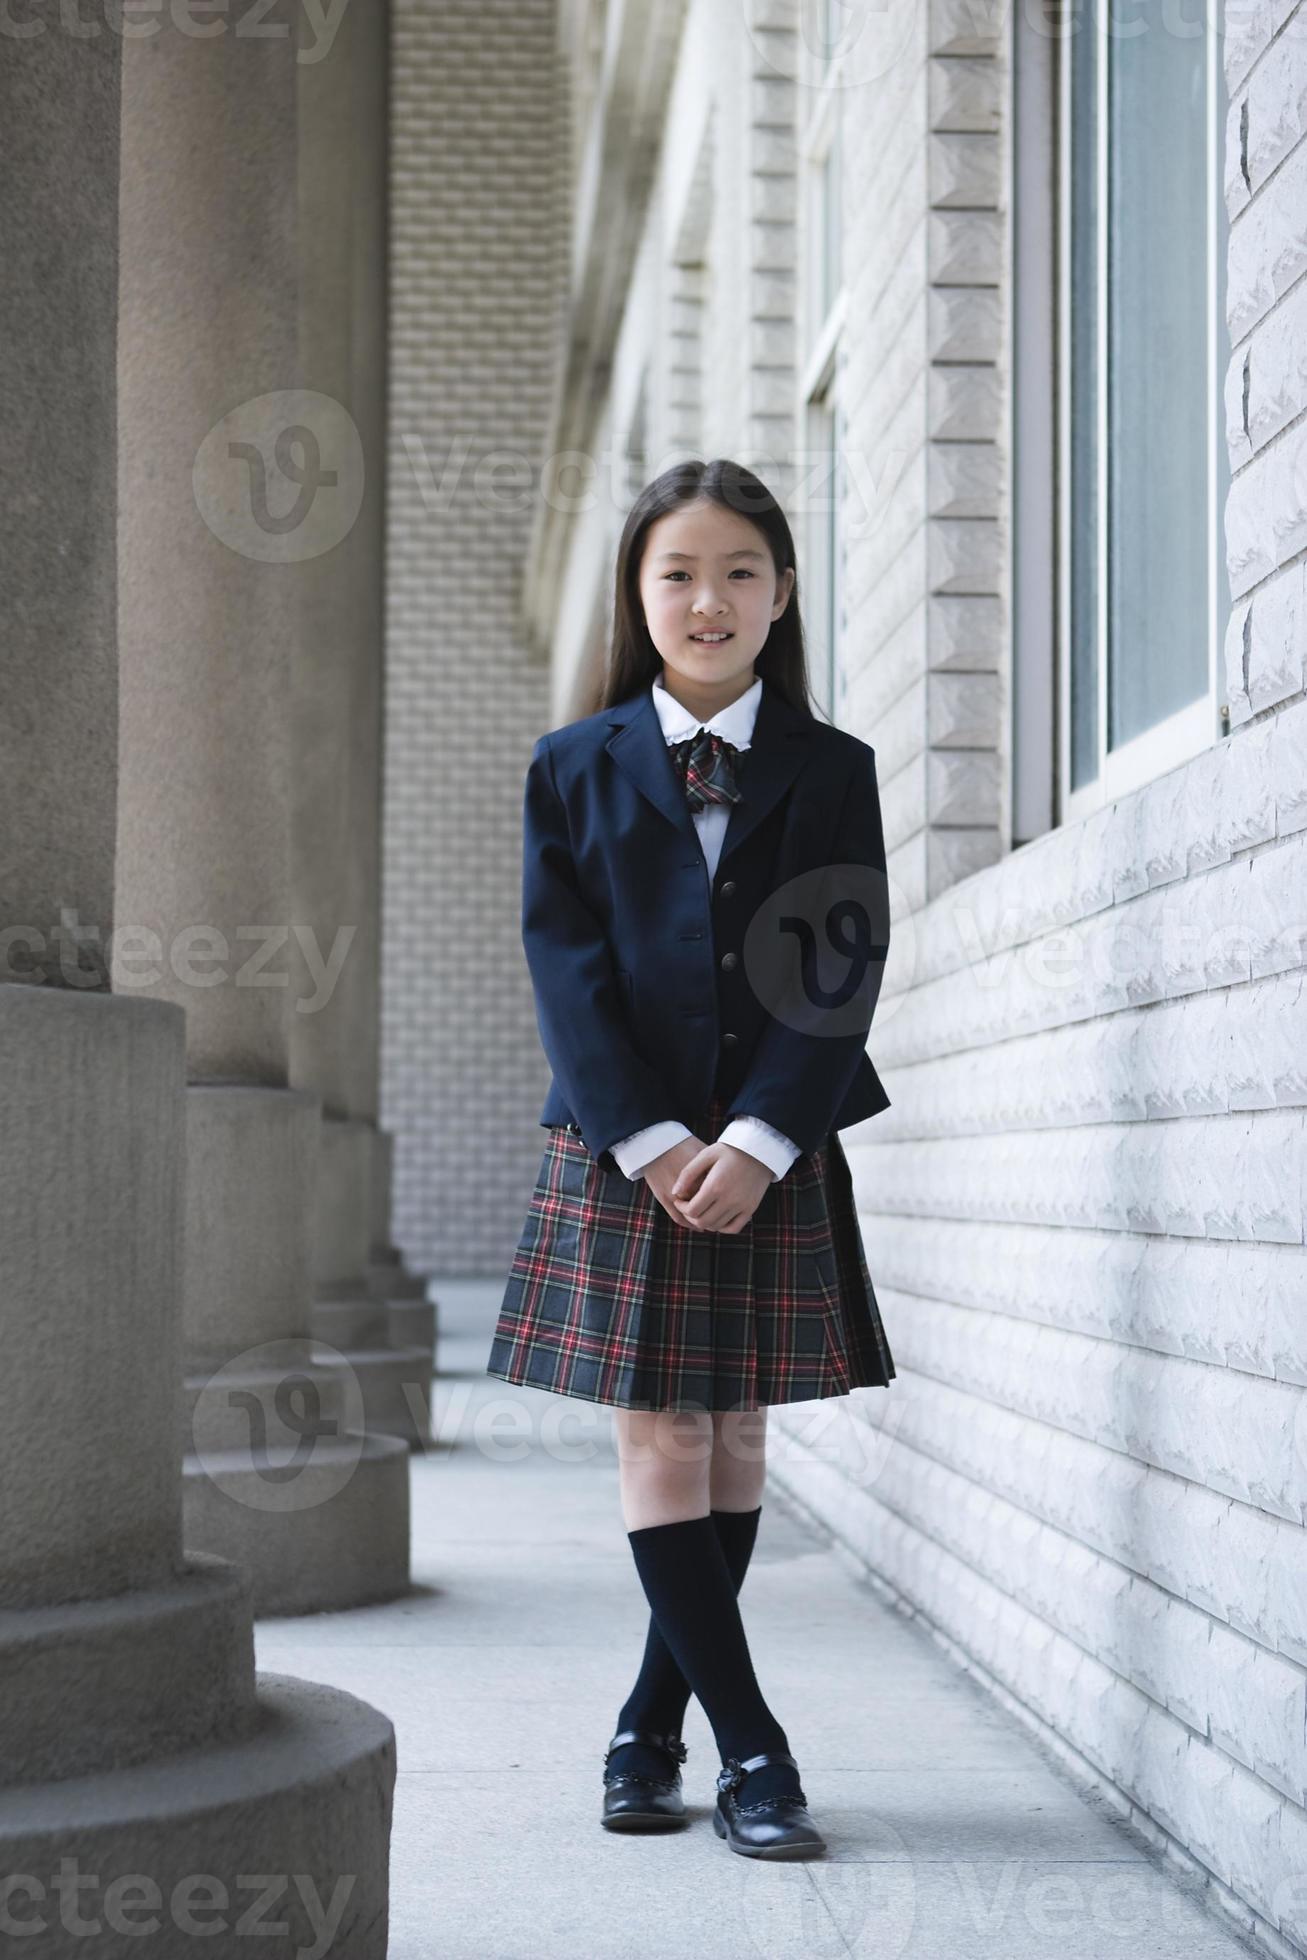 andree campbell add asian schoolgirl photos photo